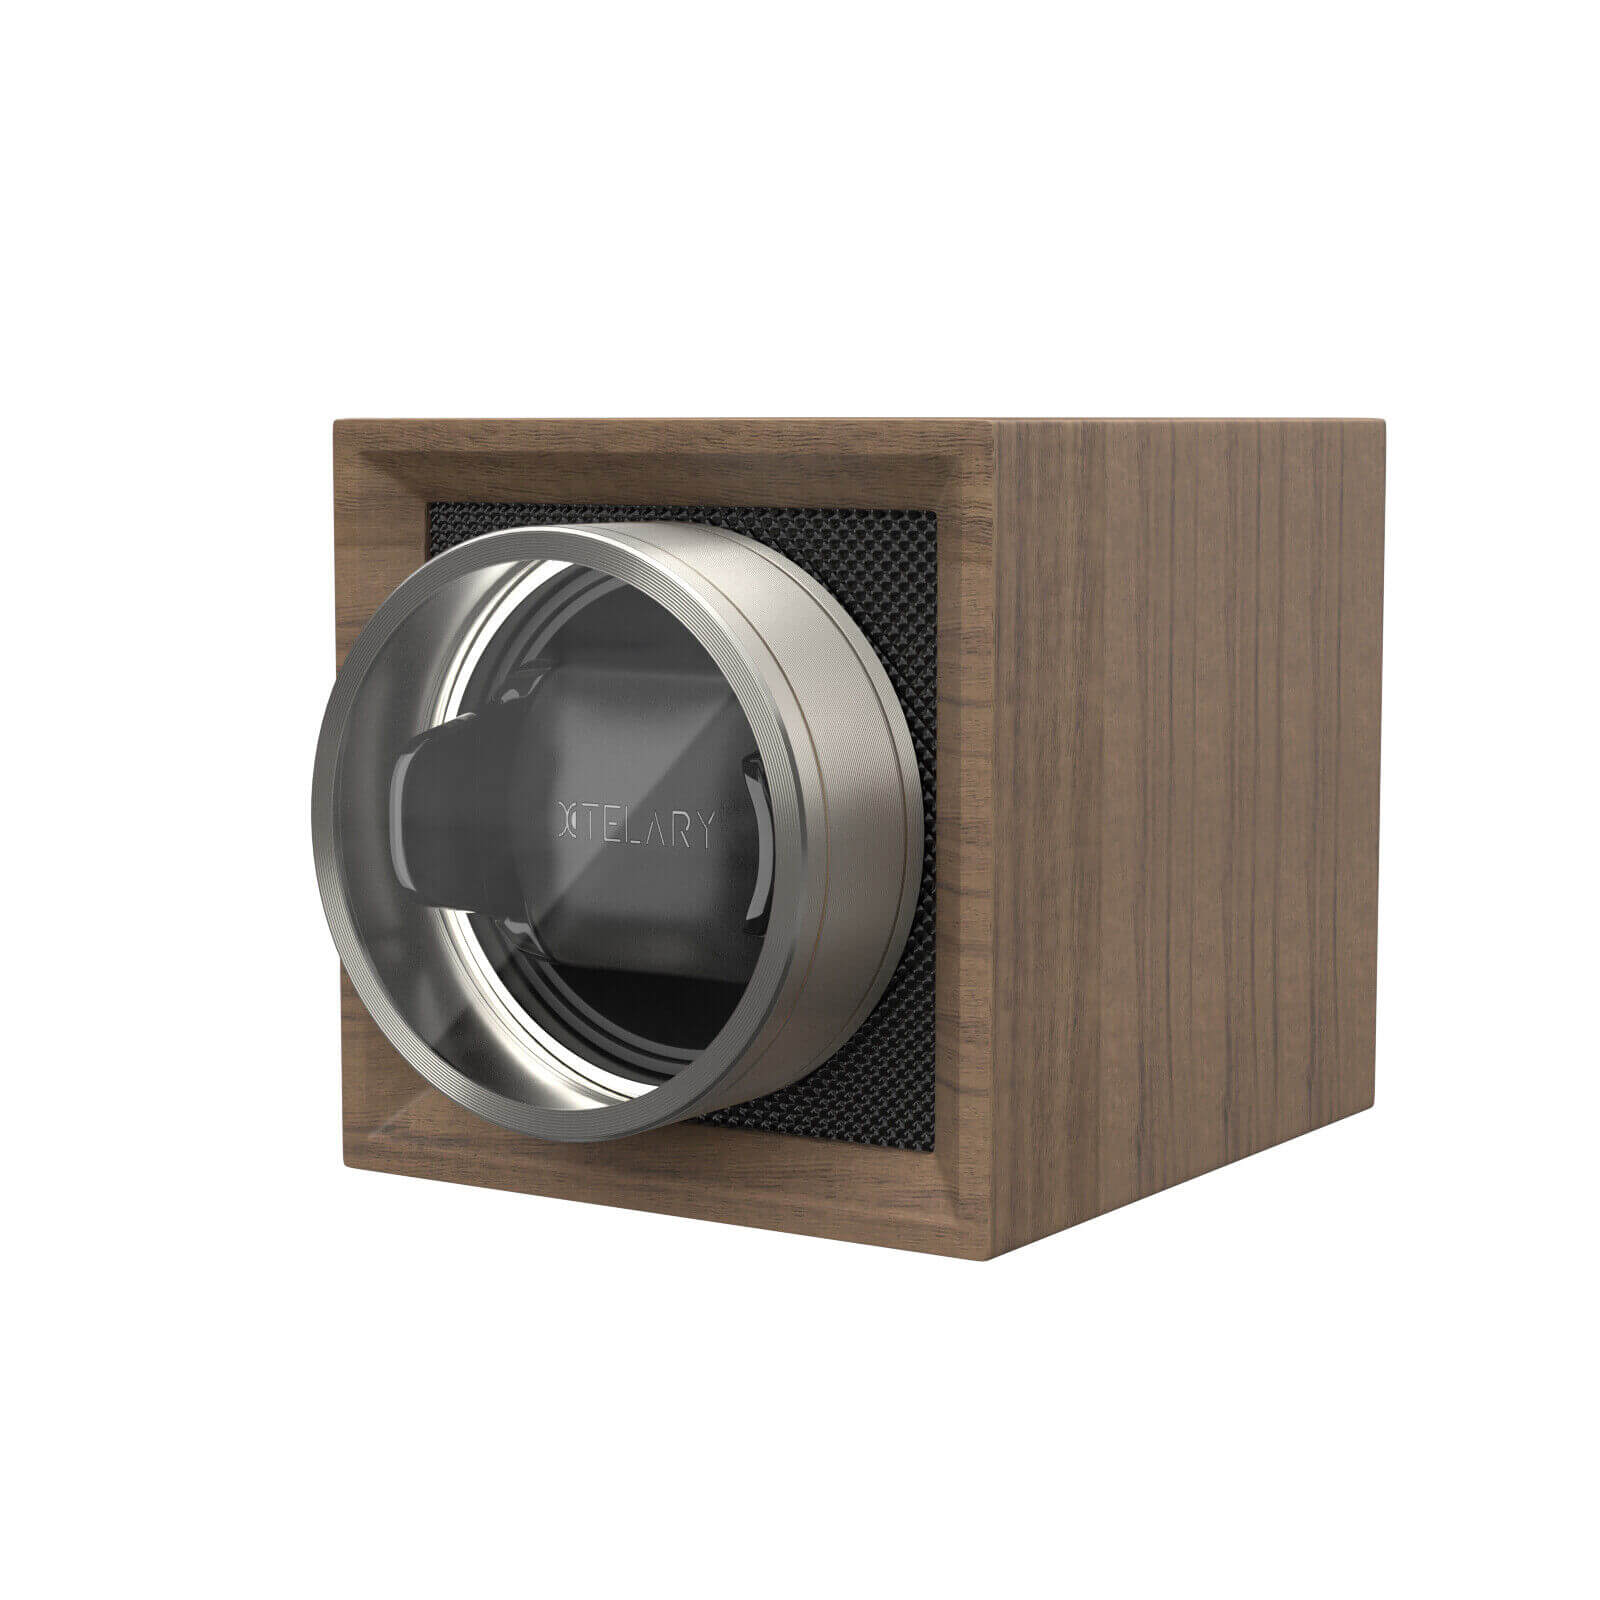 Single Watch Winder with Dual Power Supply and Quiet Mabuchi Motor - Light Wood Grain